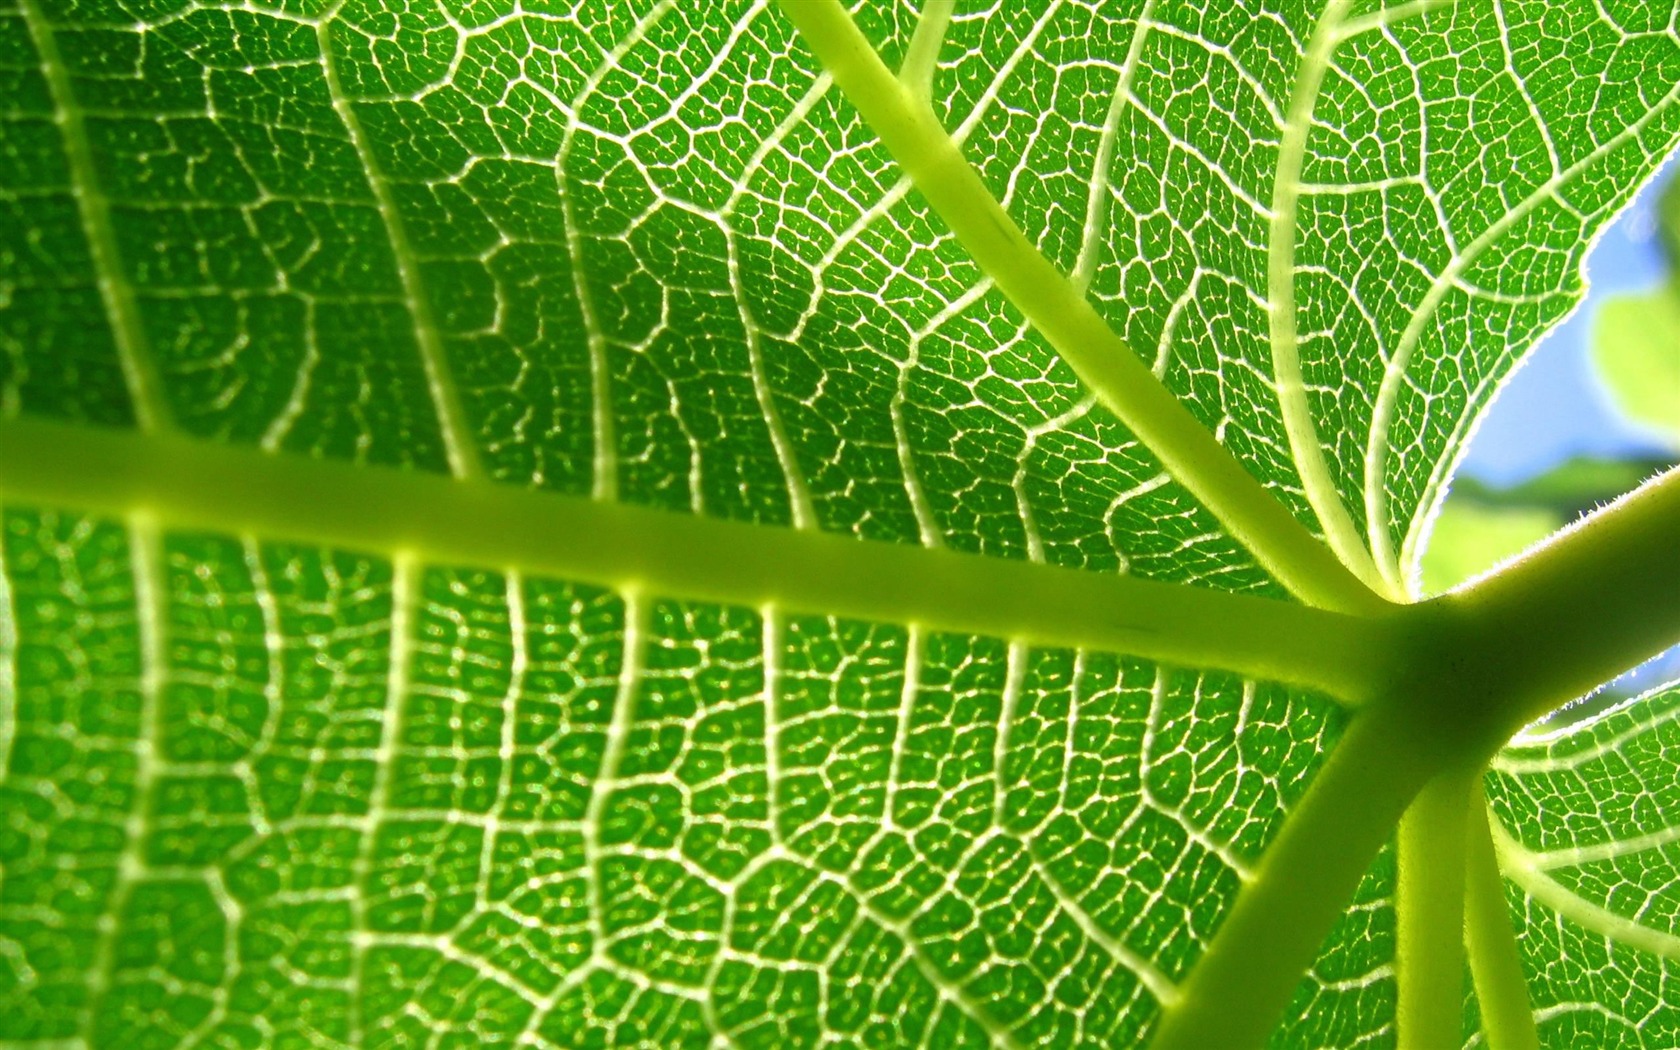 Large green leaves close-up flower wallpaper (2) #13 - 1680x1050